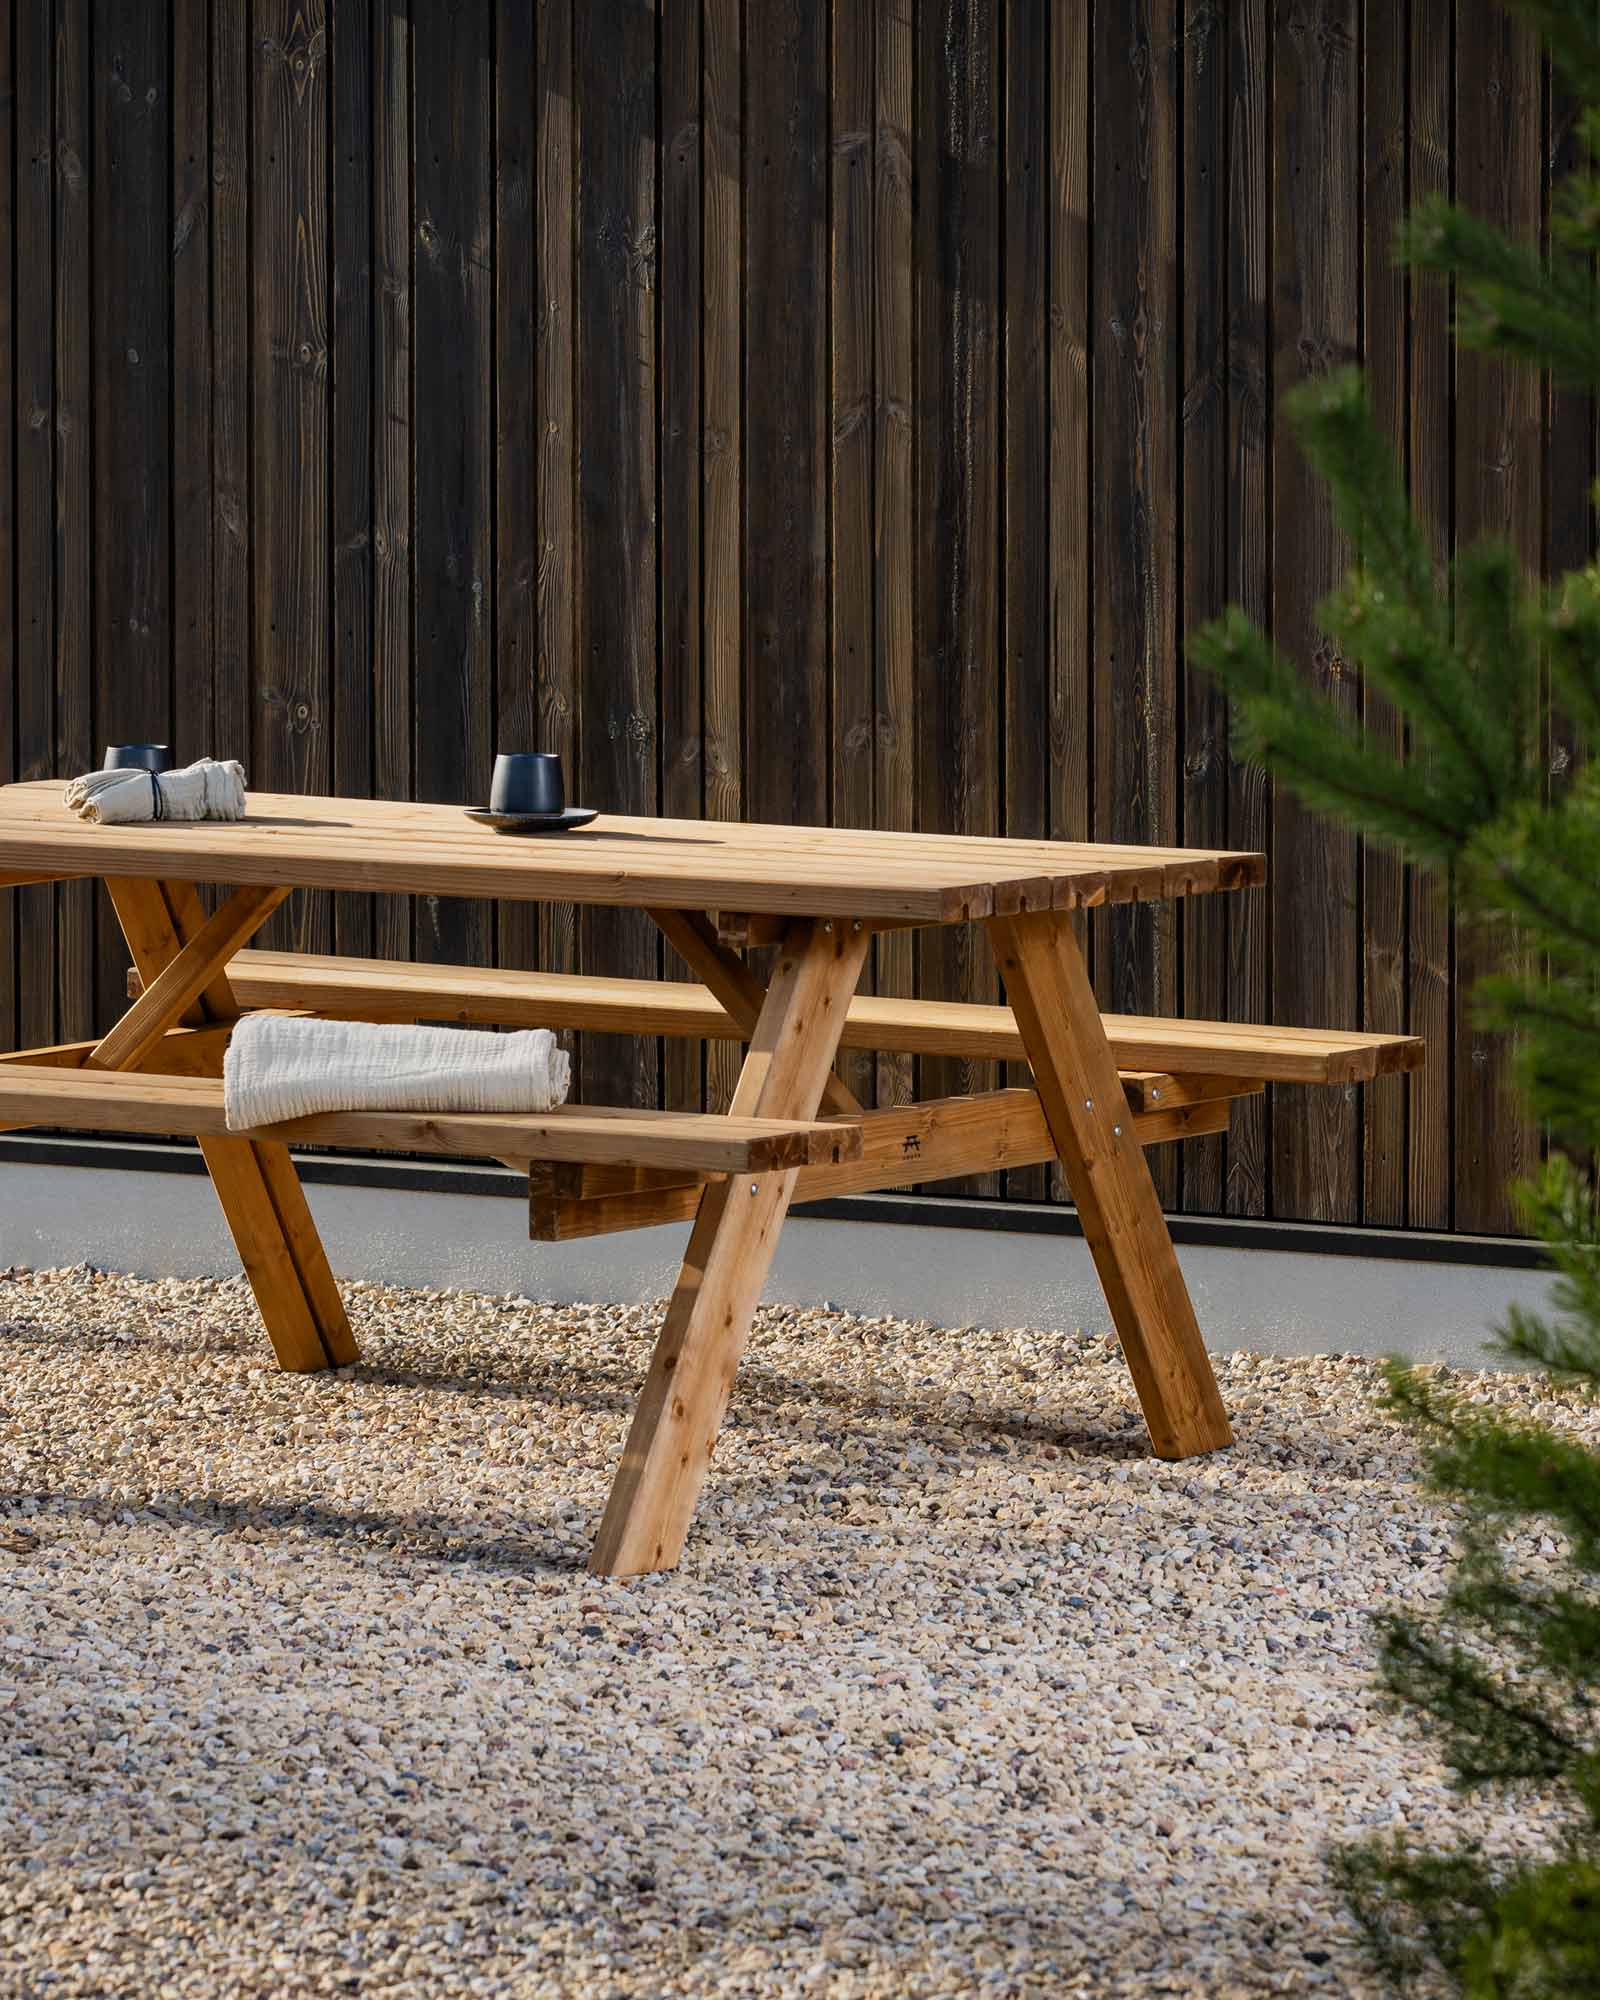 Brown picnic table against a wooden house wall